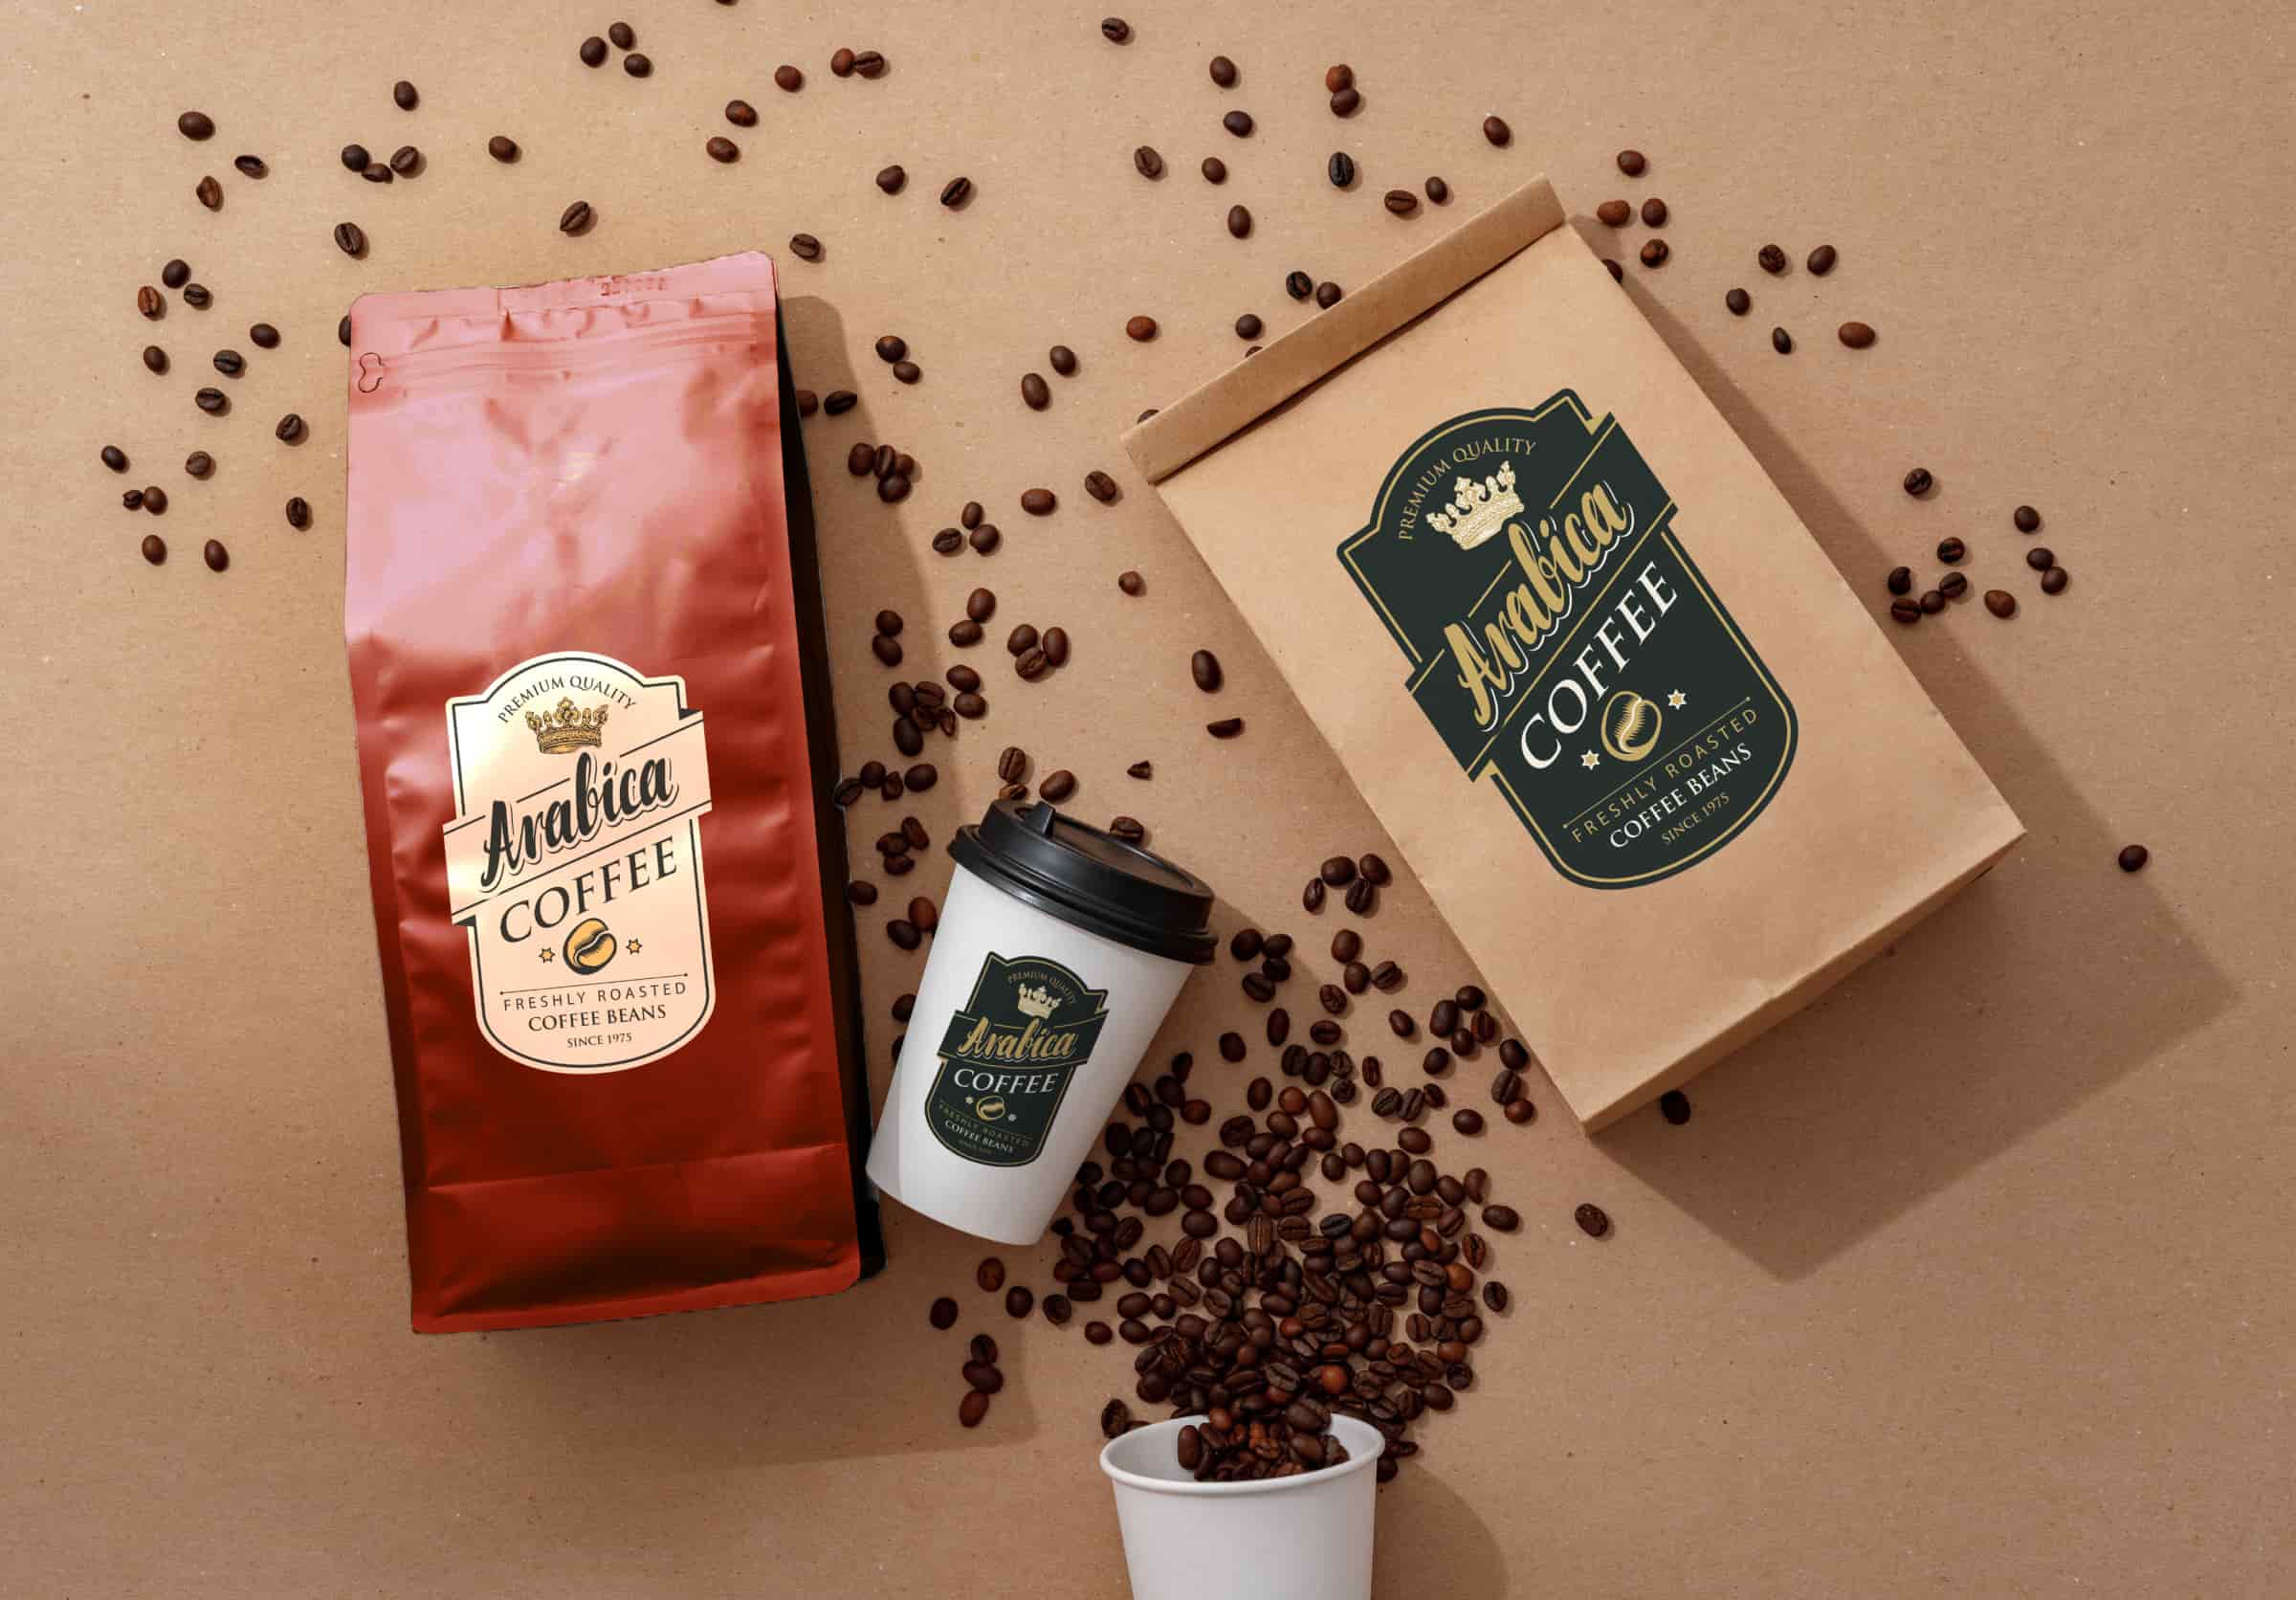 Coffee packaging pouches and products with vintage design labels.